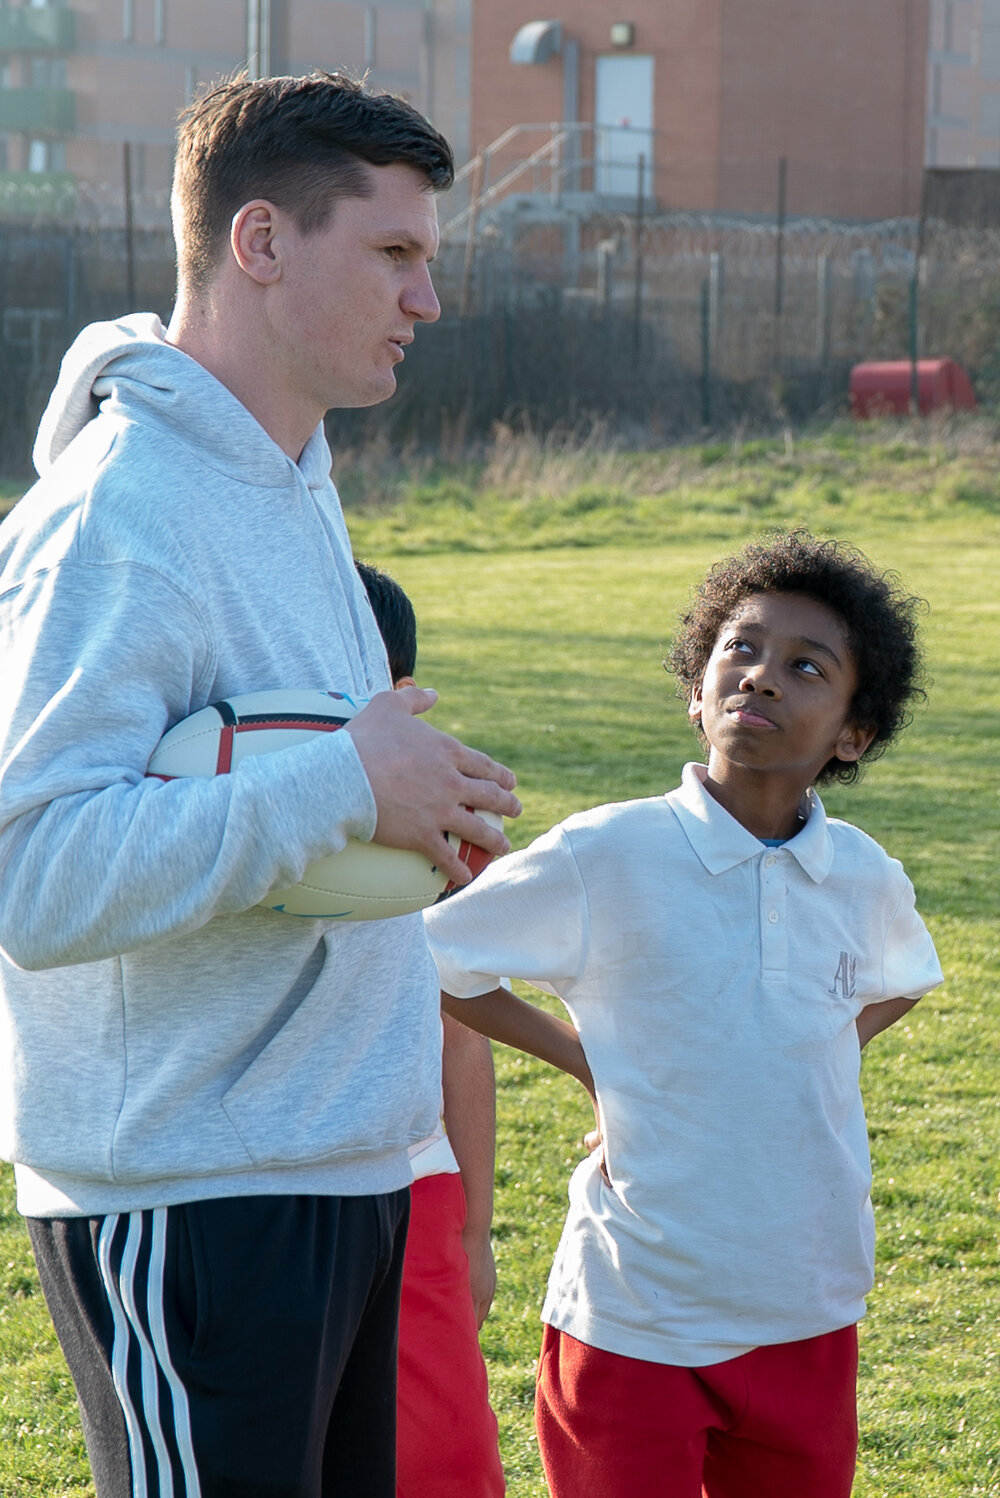 Freddie mentors a youngster in London, 2020, for non-profit foundation DFY. Photo: International Sports Consulting